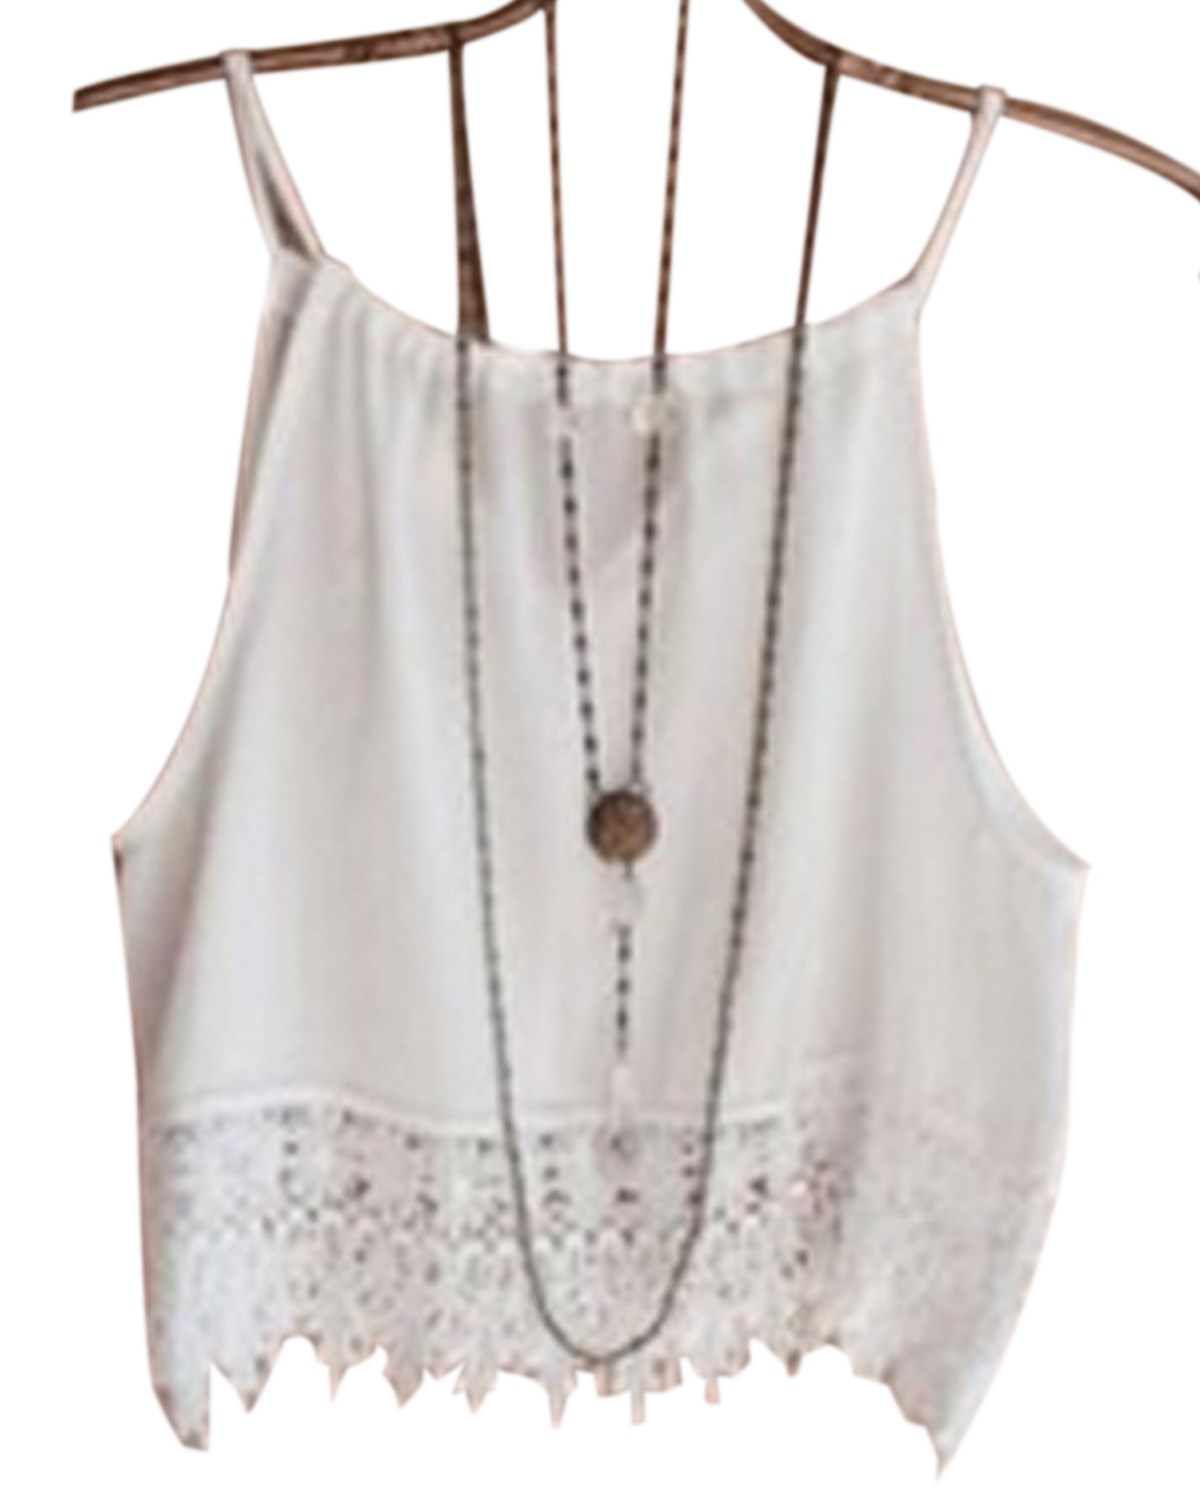 2015 Summer Style Crop Top Sexy Women Sleeveless Camisole Casual Lace Patchwork Chiffon Tank Tops White Blusas Femininas